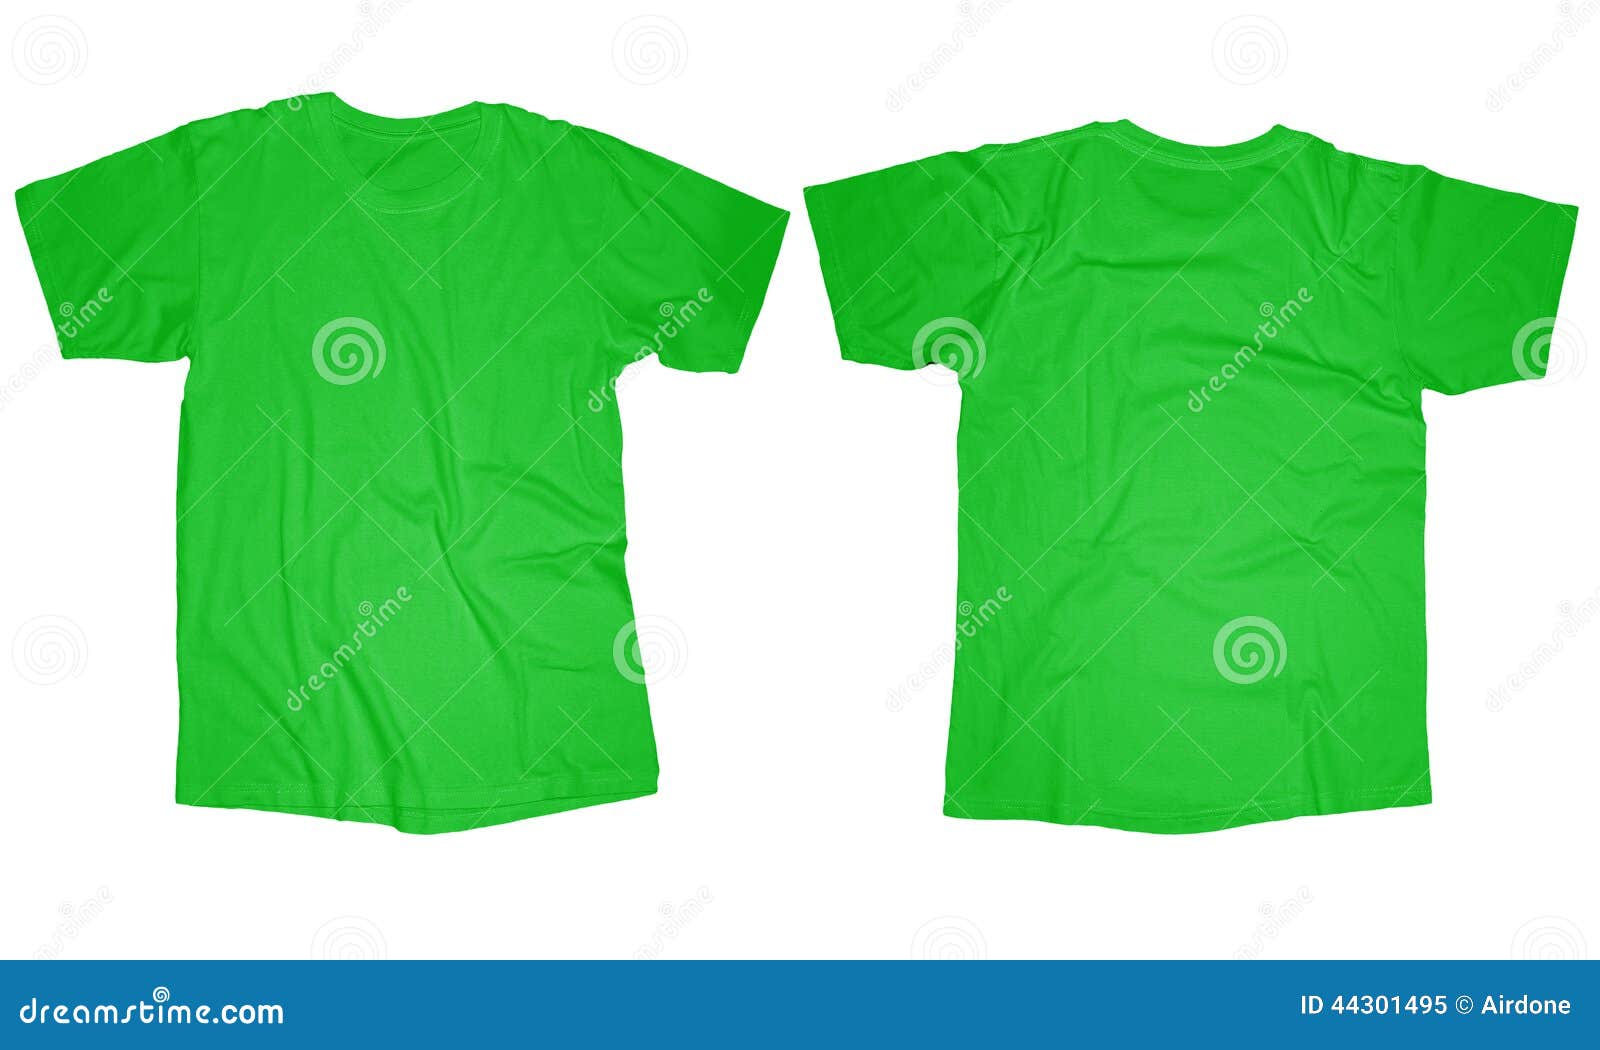 light-green-t-shirt-template-stock-image-image-of-female-fabric-44301495